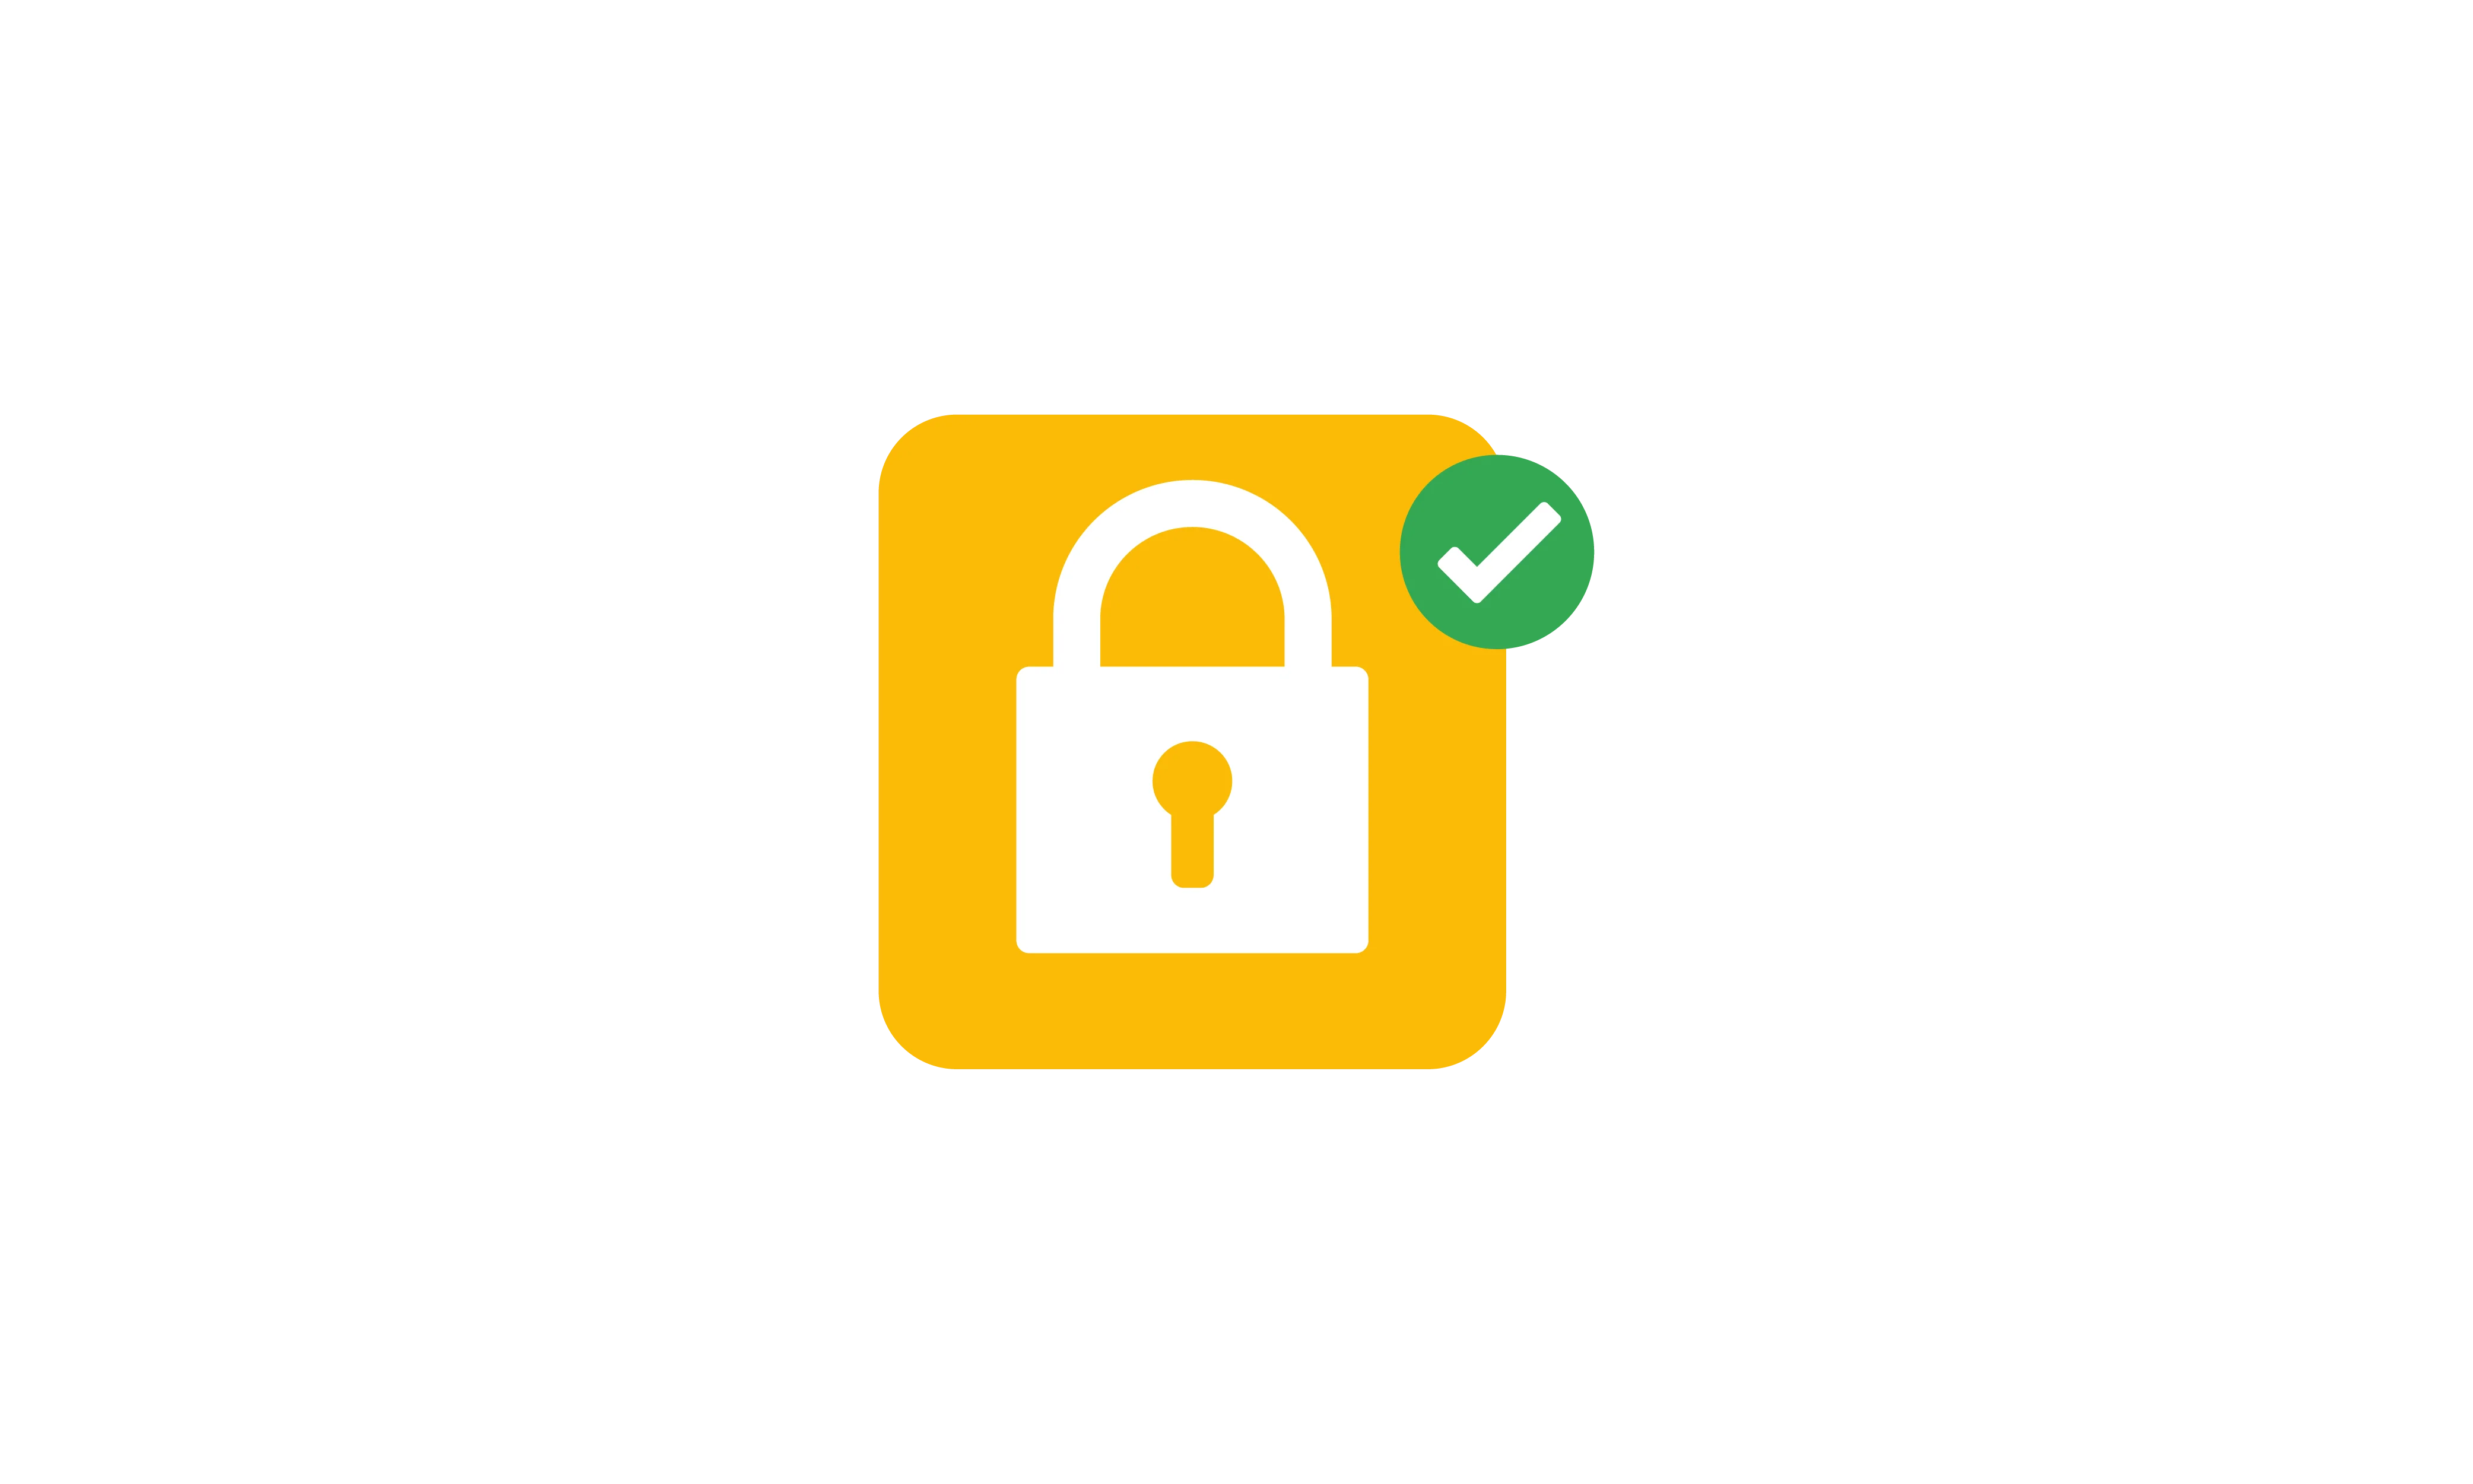 Yellow square with a graphic of a lock inside it and a check mark inside a green circle